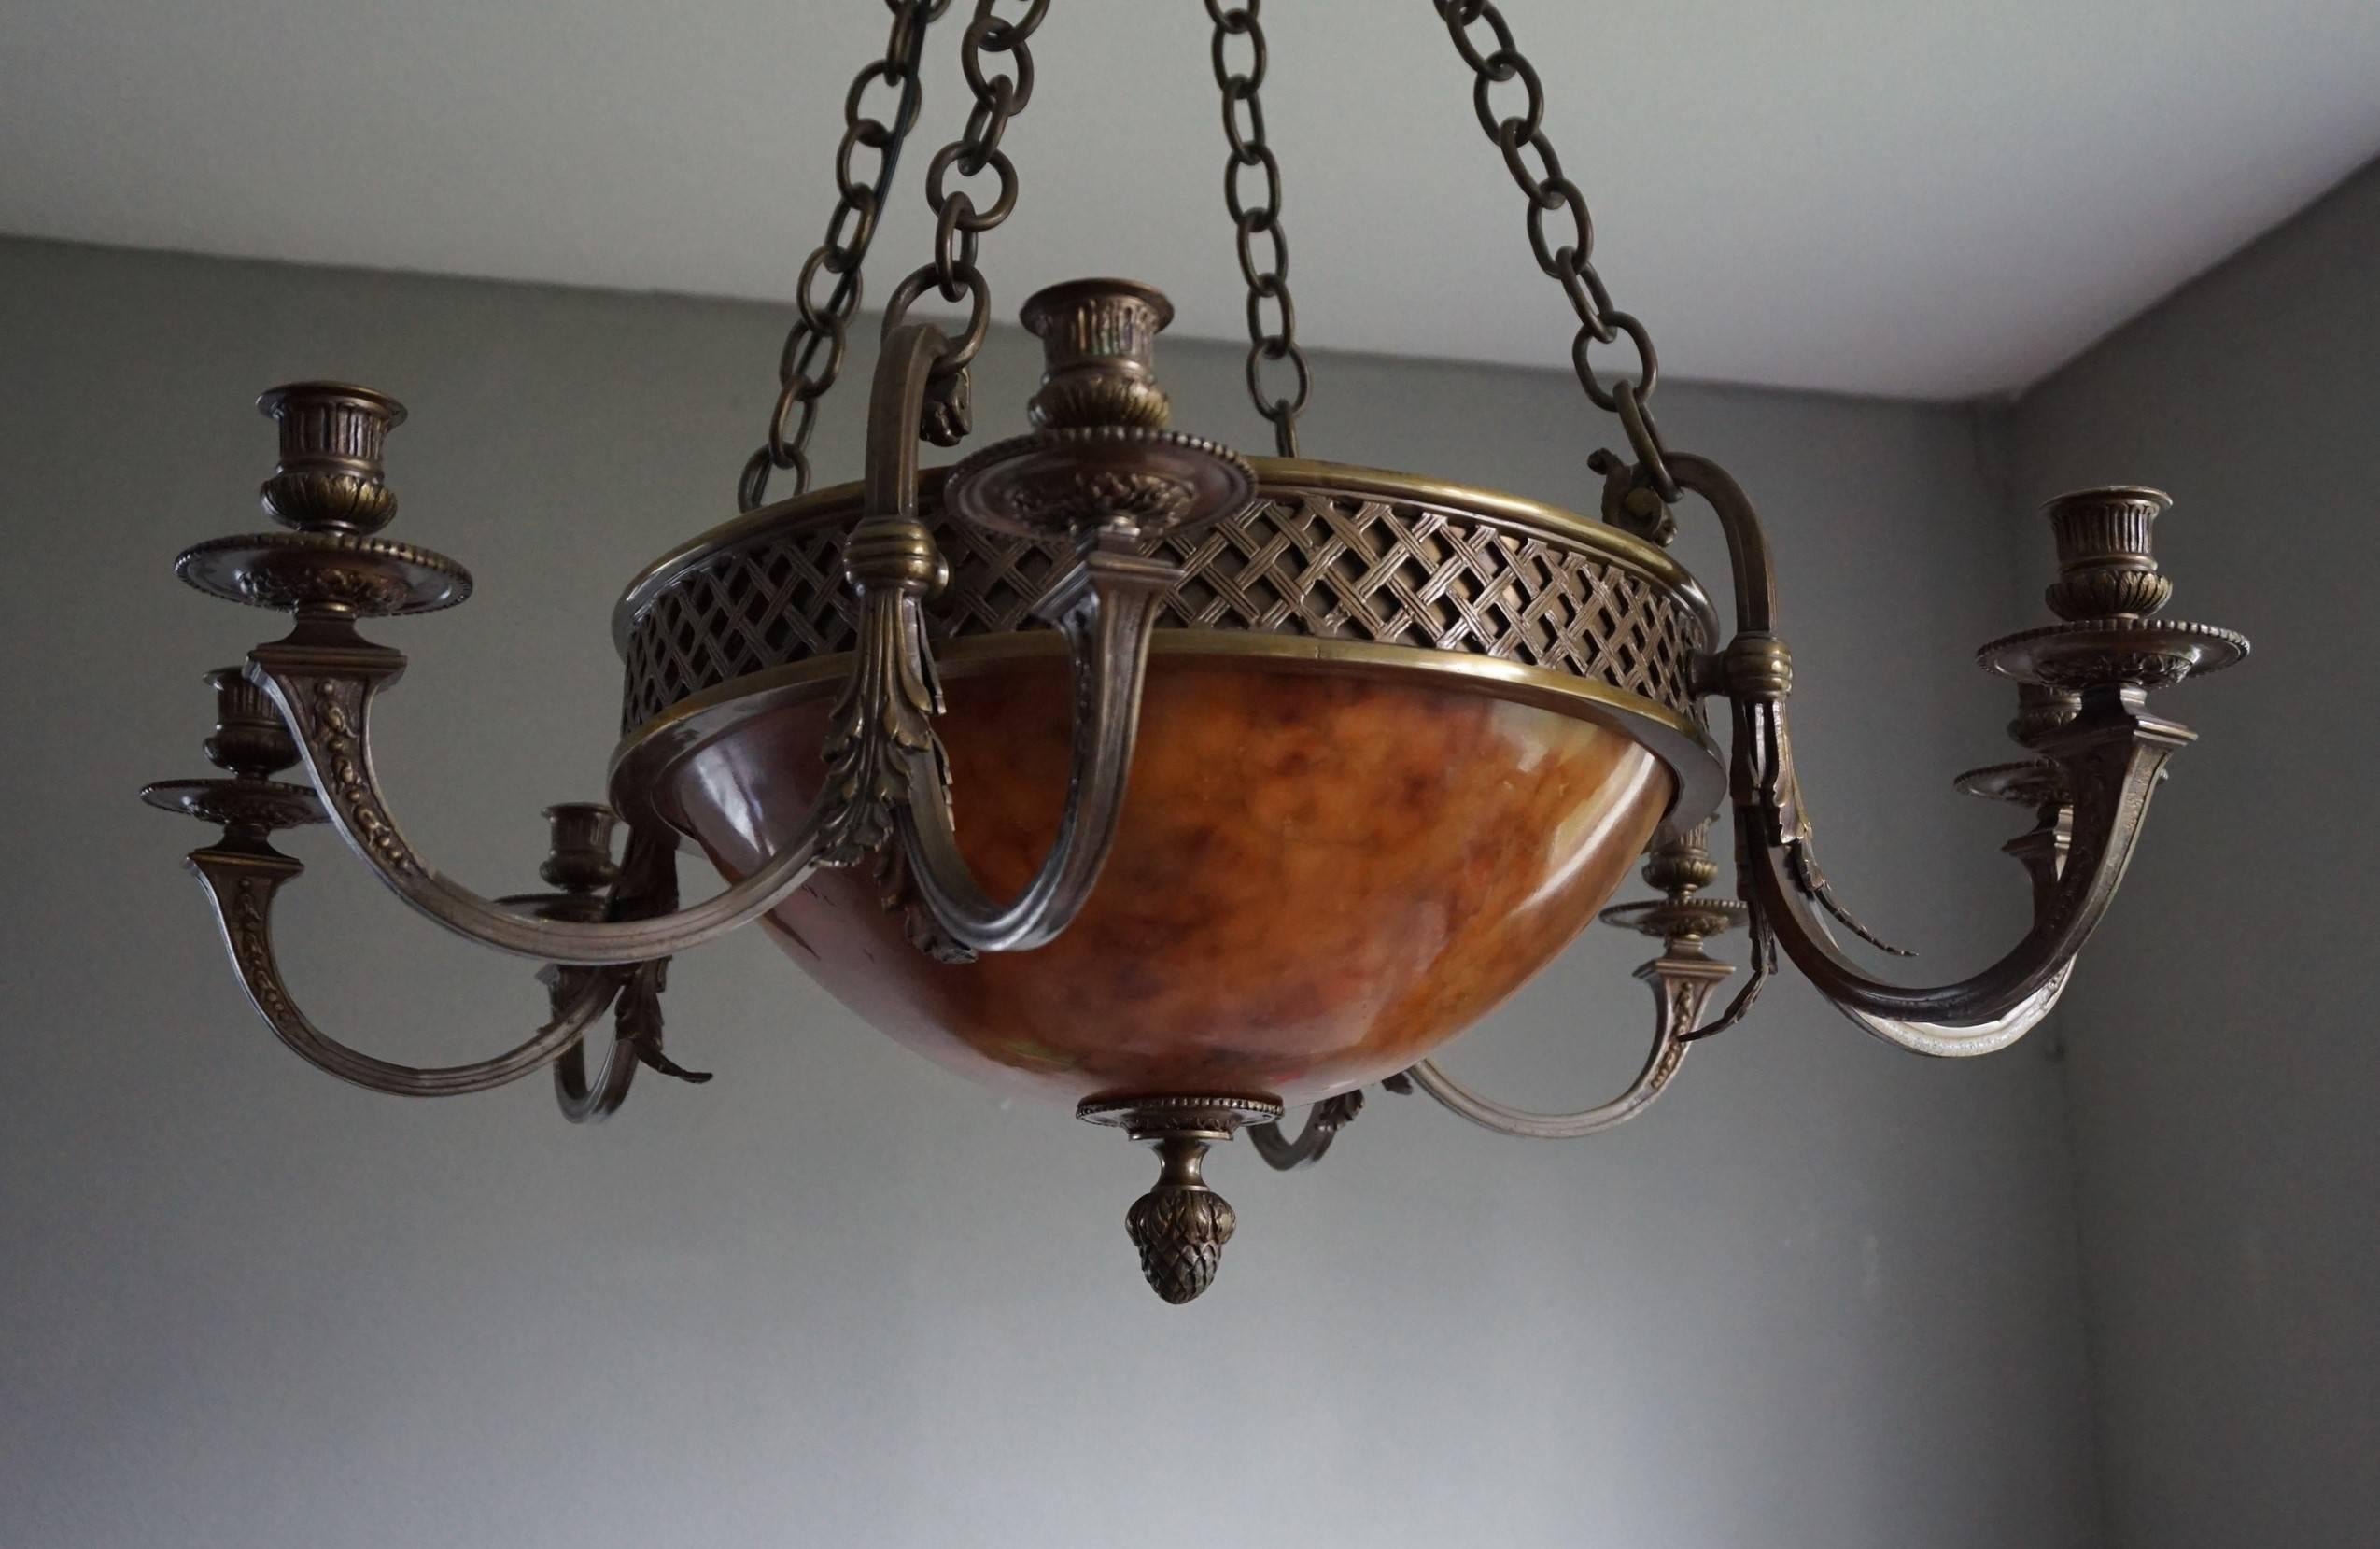 Bronzed Stunning Early 1900s Bronze and Alabaster Four-Light Chandelier with Candelabras For Sale